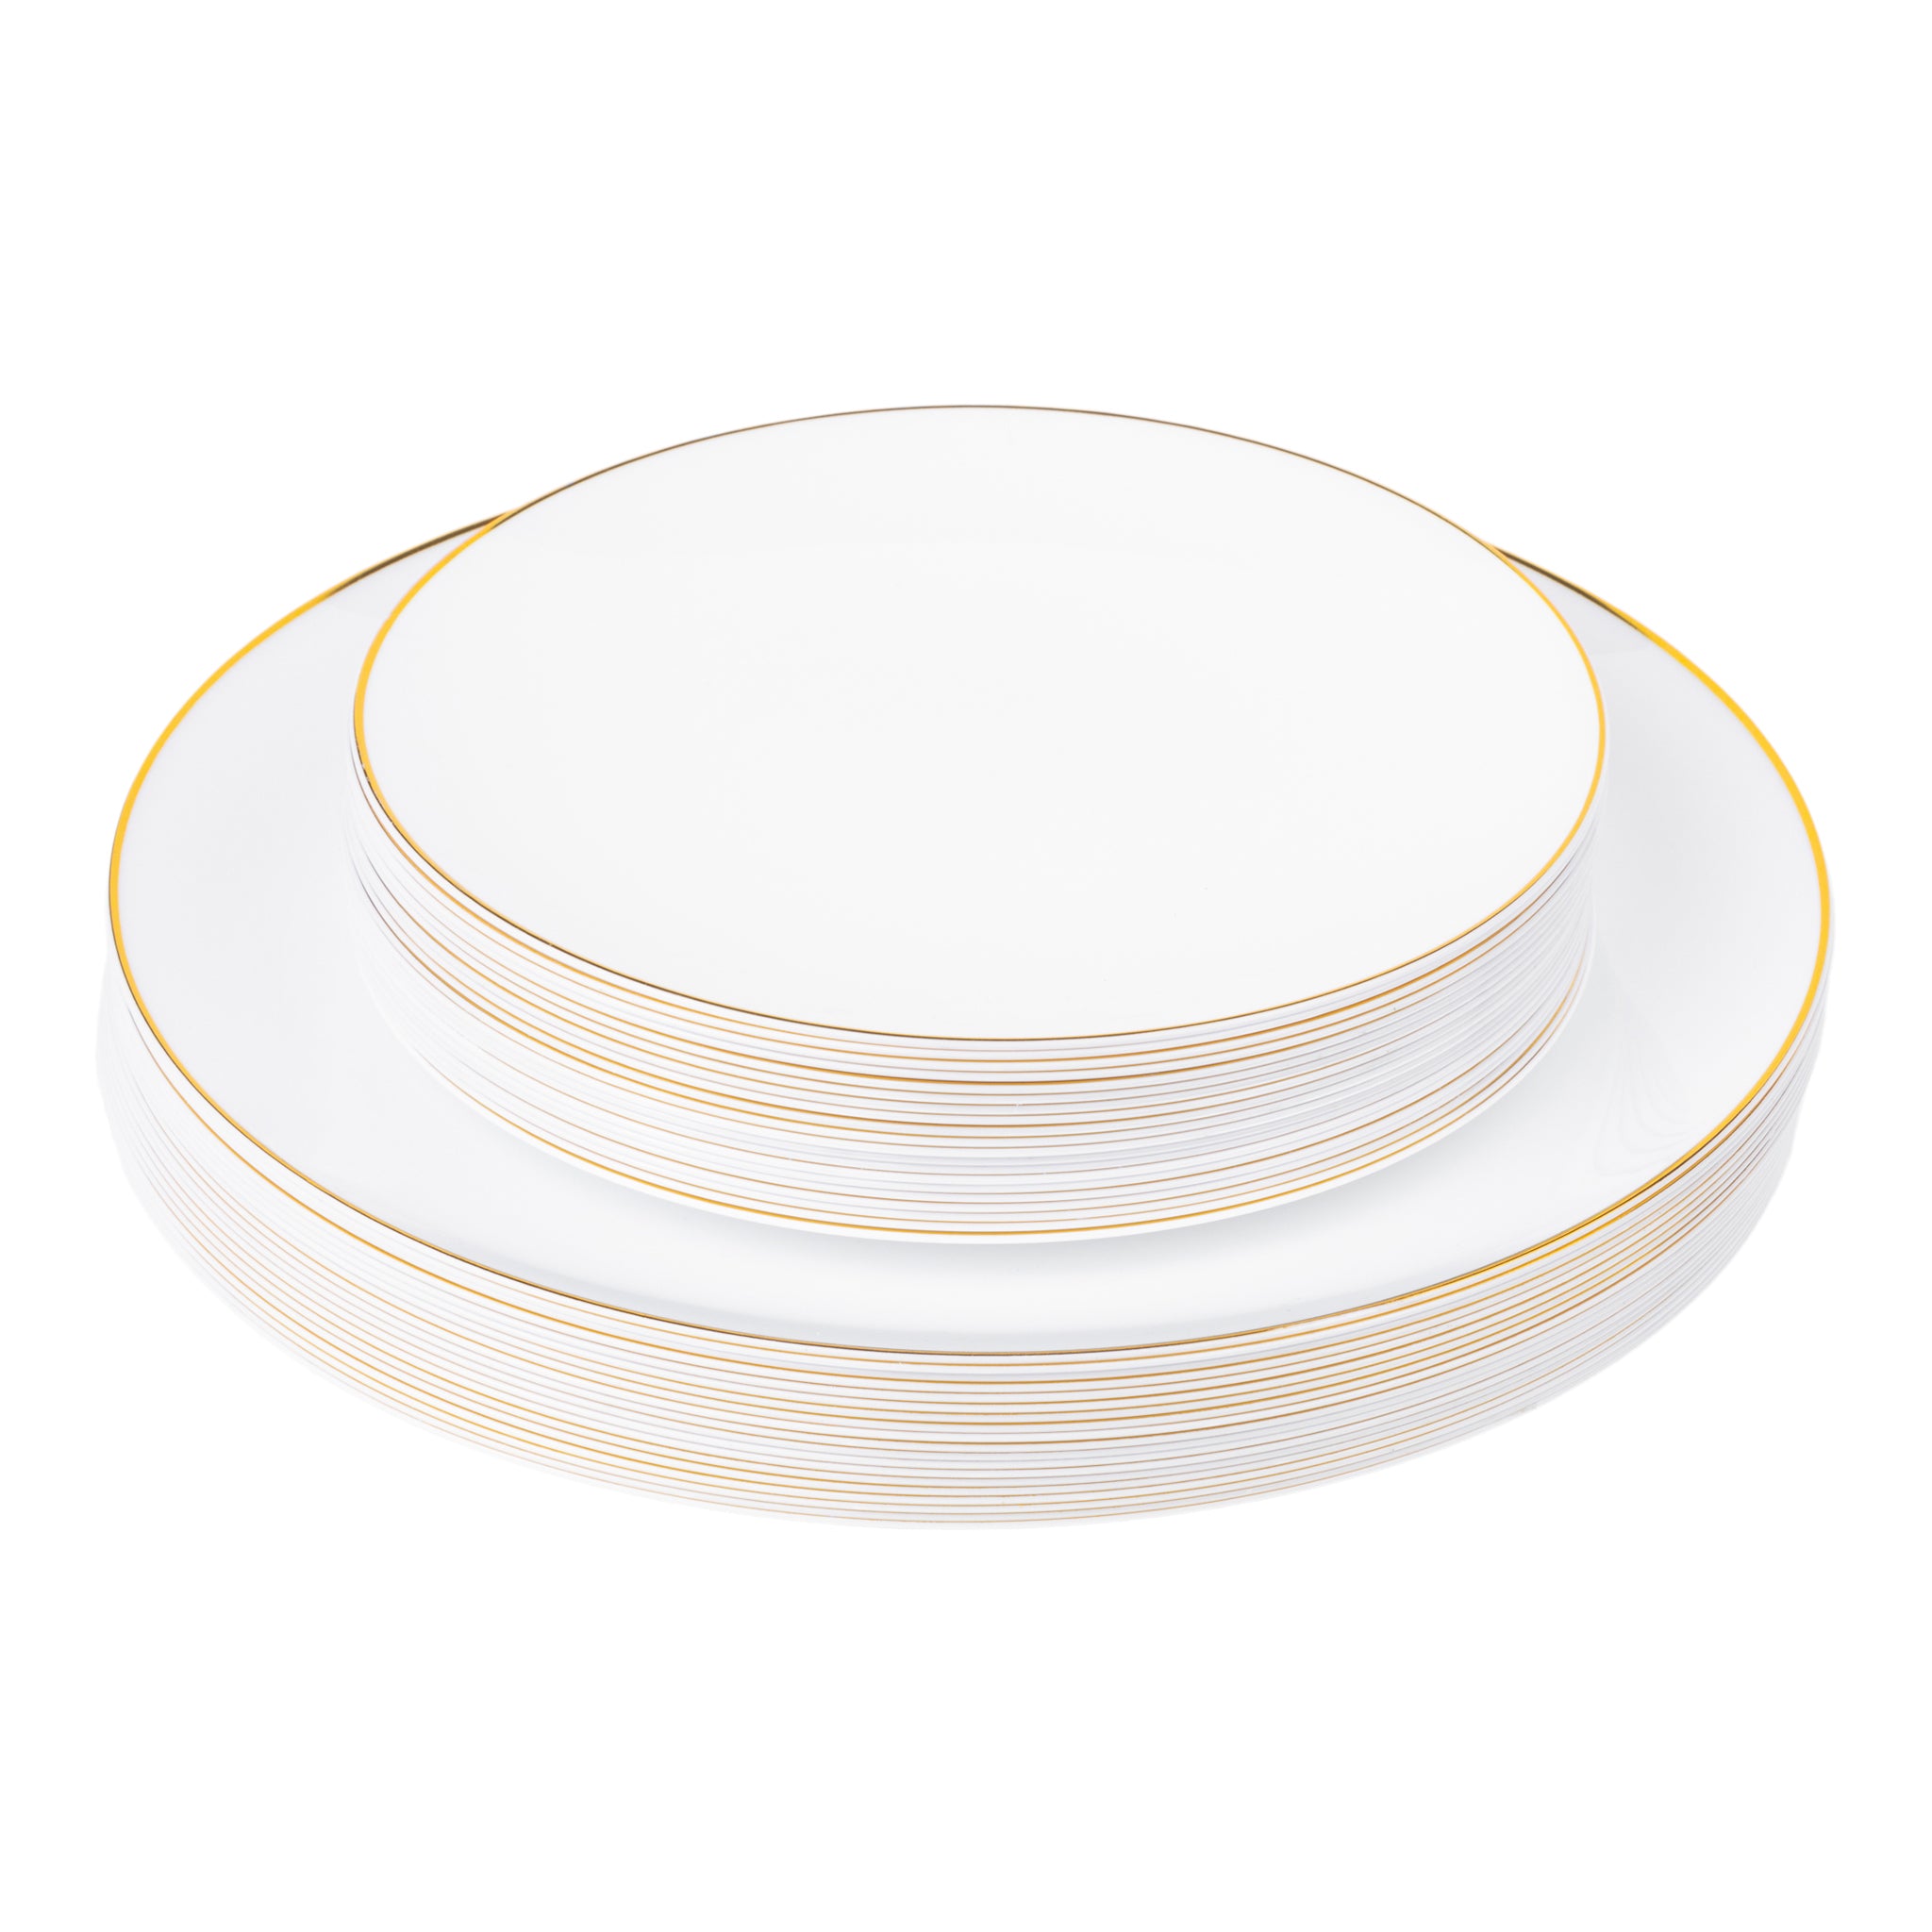 Modern Disposable Plastic Plates 40 pcs Pack - White Gold-Trimmed